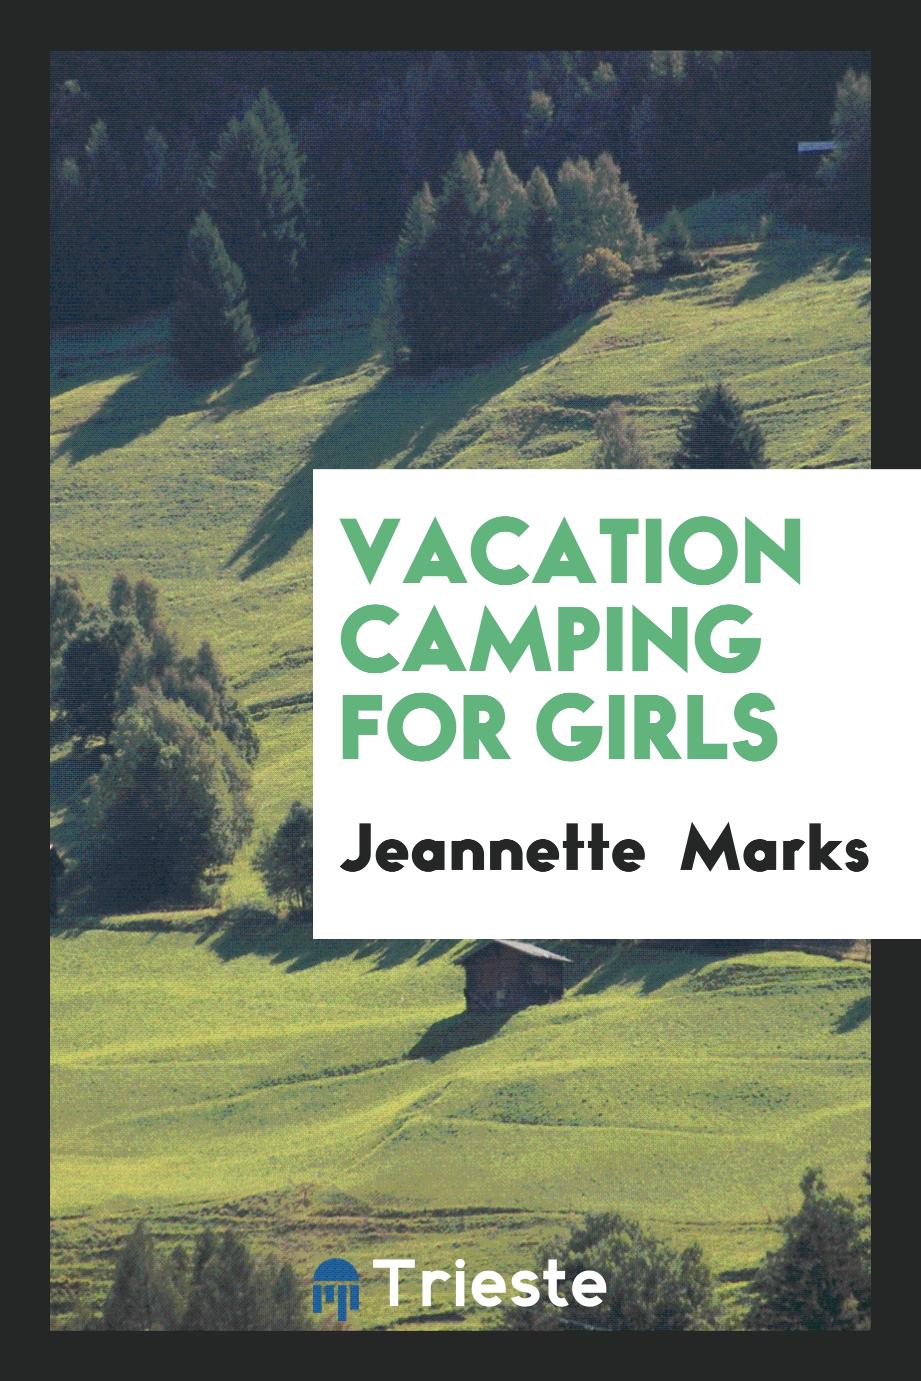 Vacation camping for girls